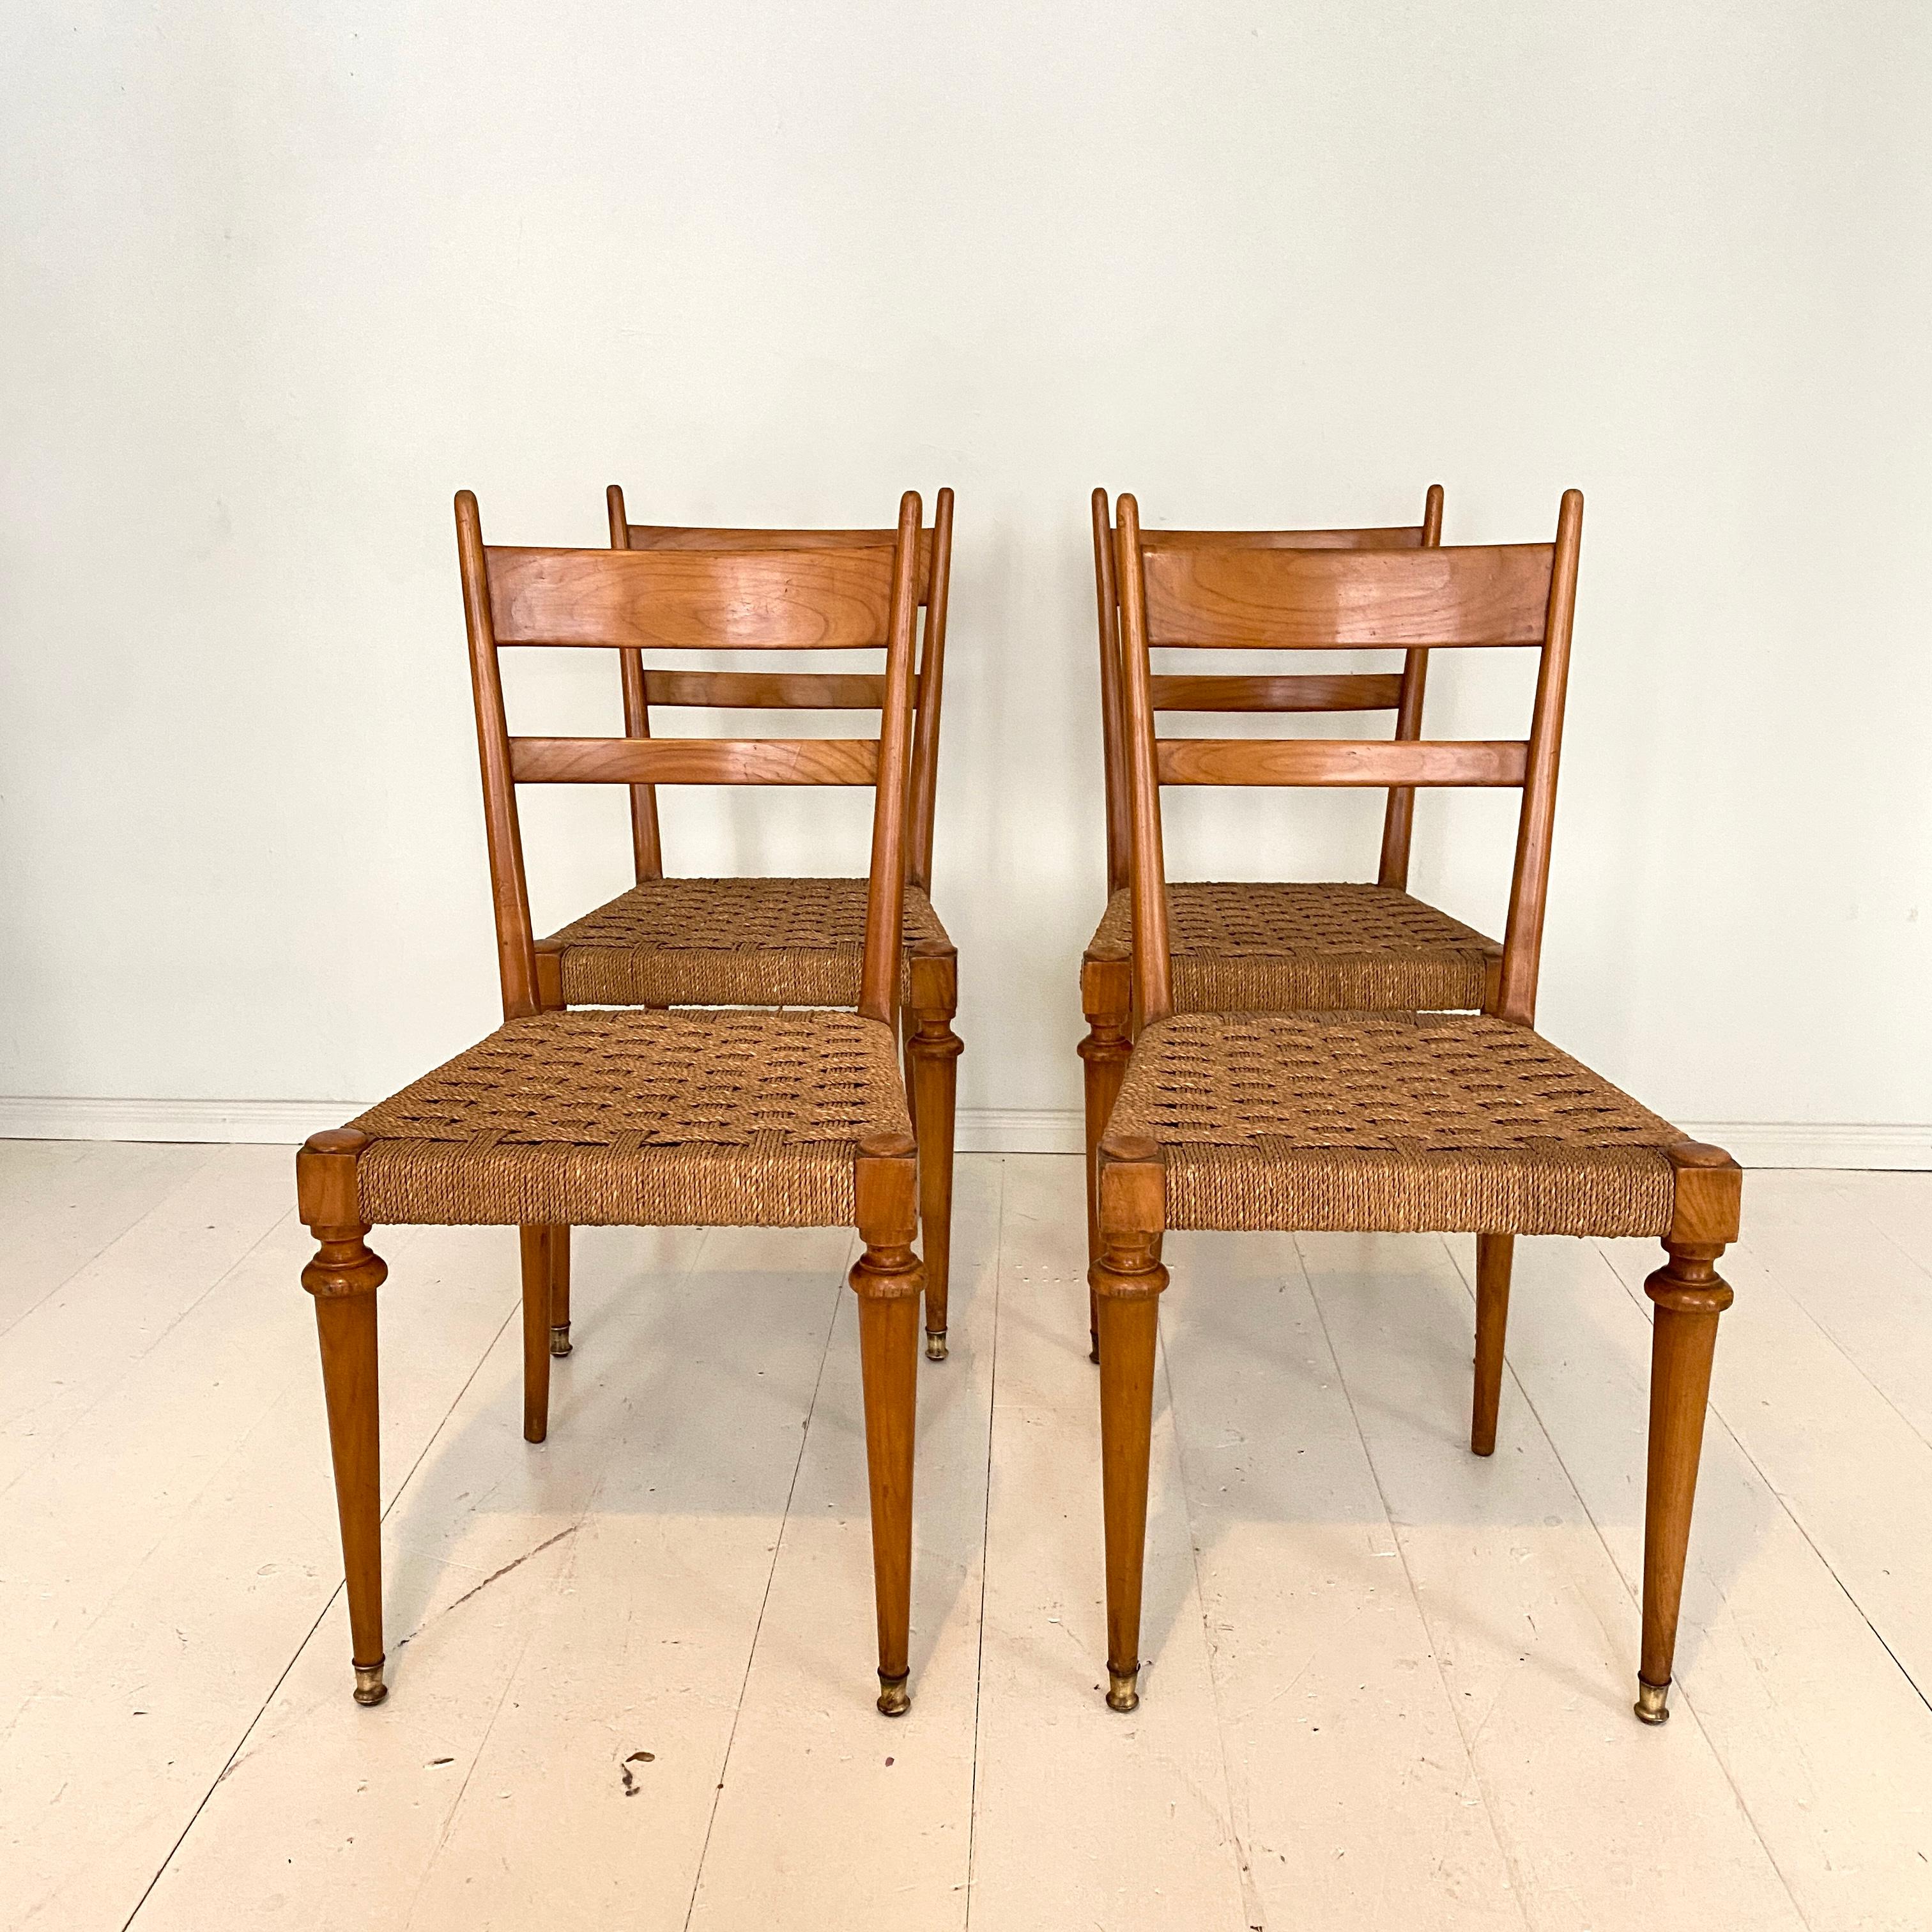 This set of four Italian mid-century dining chairs where probably designed and made by Gugliemo Pecorini in the early 1940s. they are made in solid cherry and handcrafted seat in woven rope.
The turned front legs have a brass shoe ending. With the